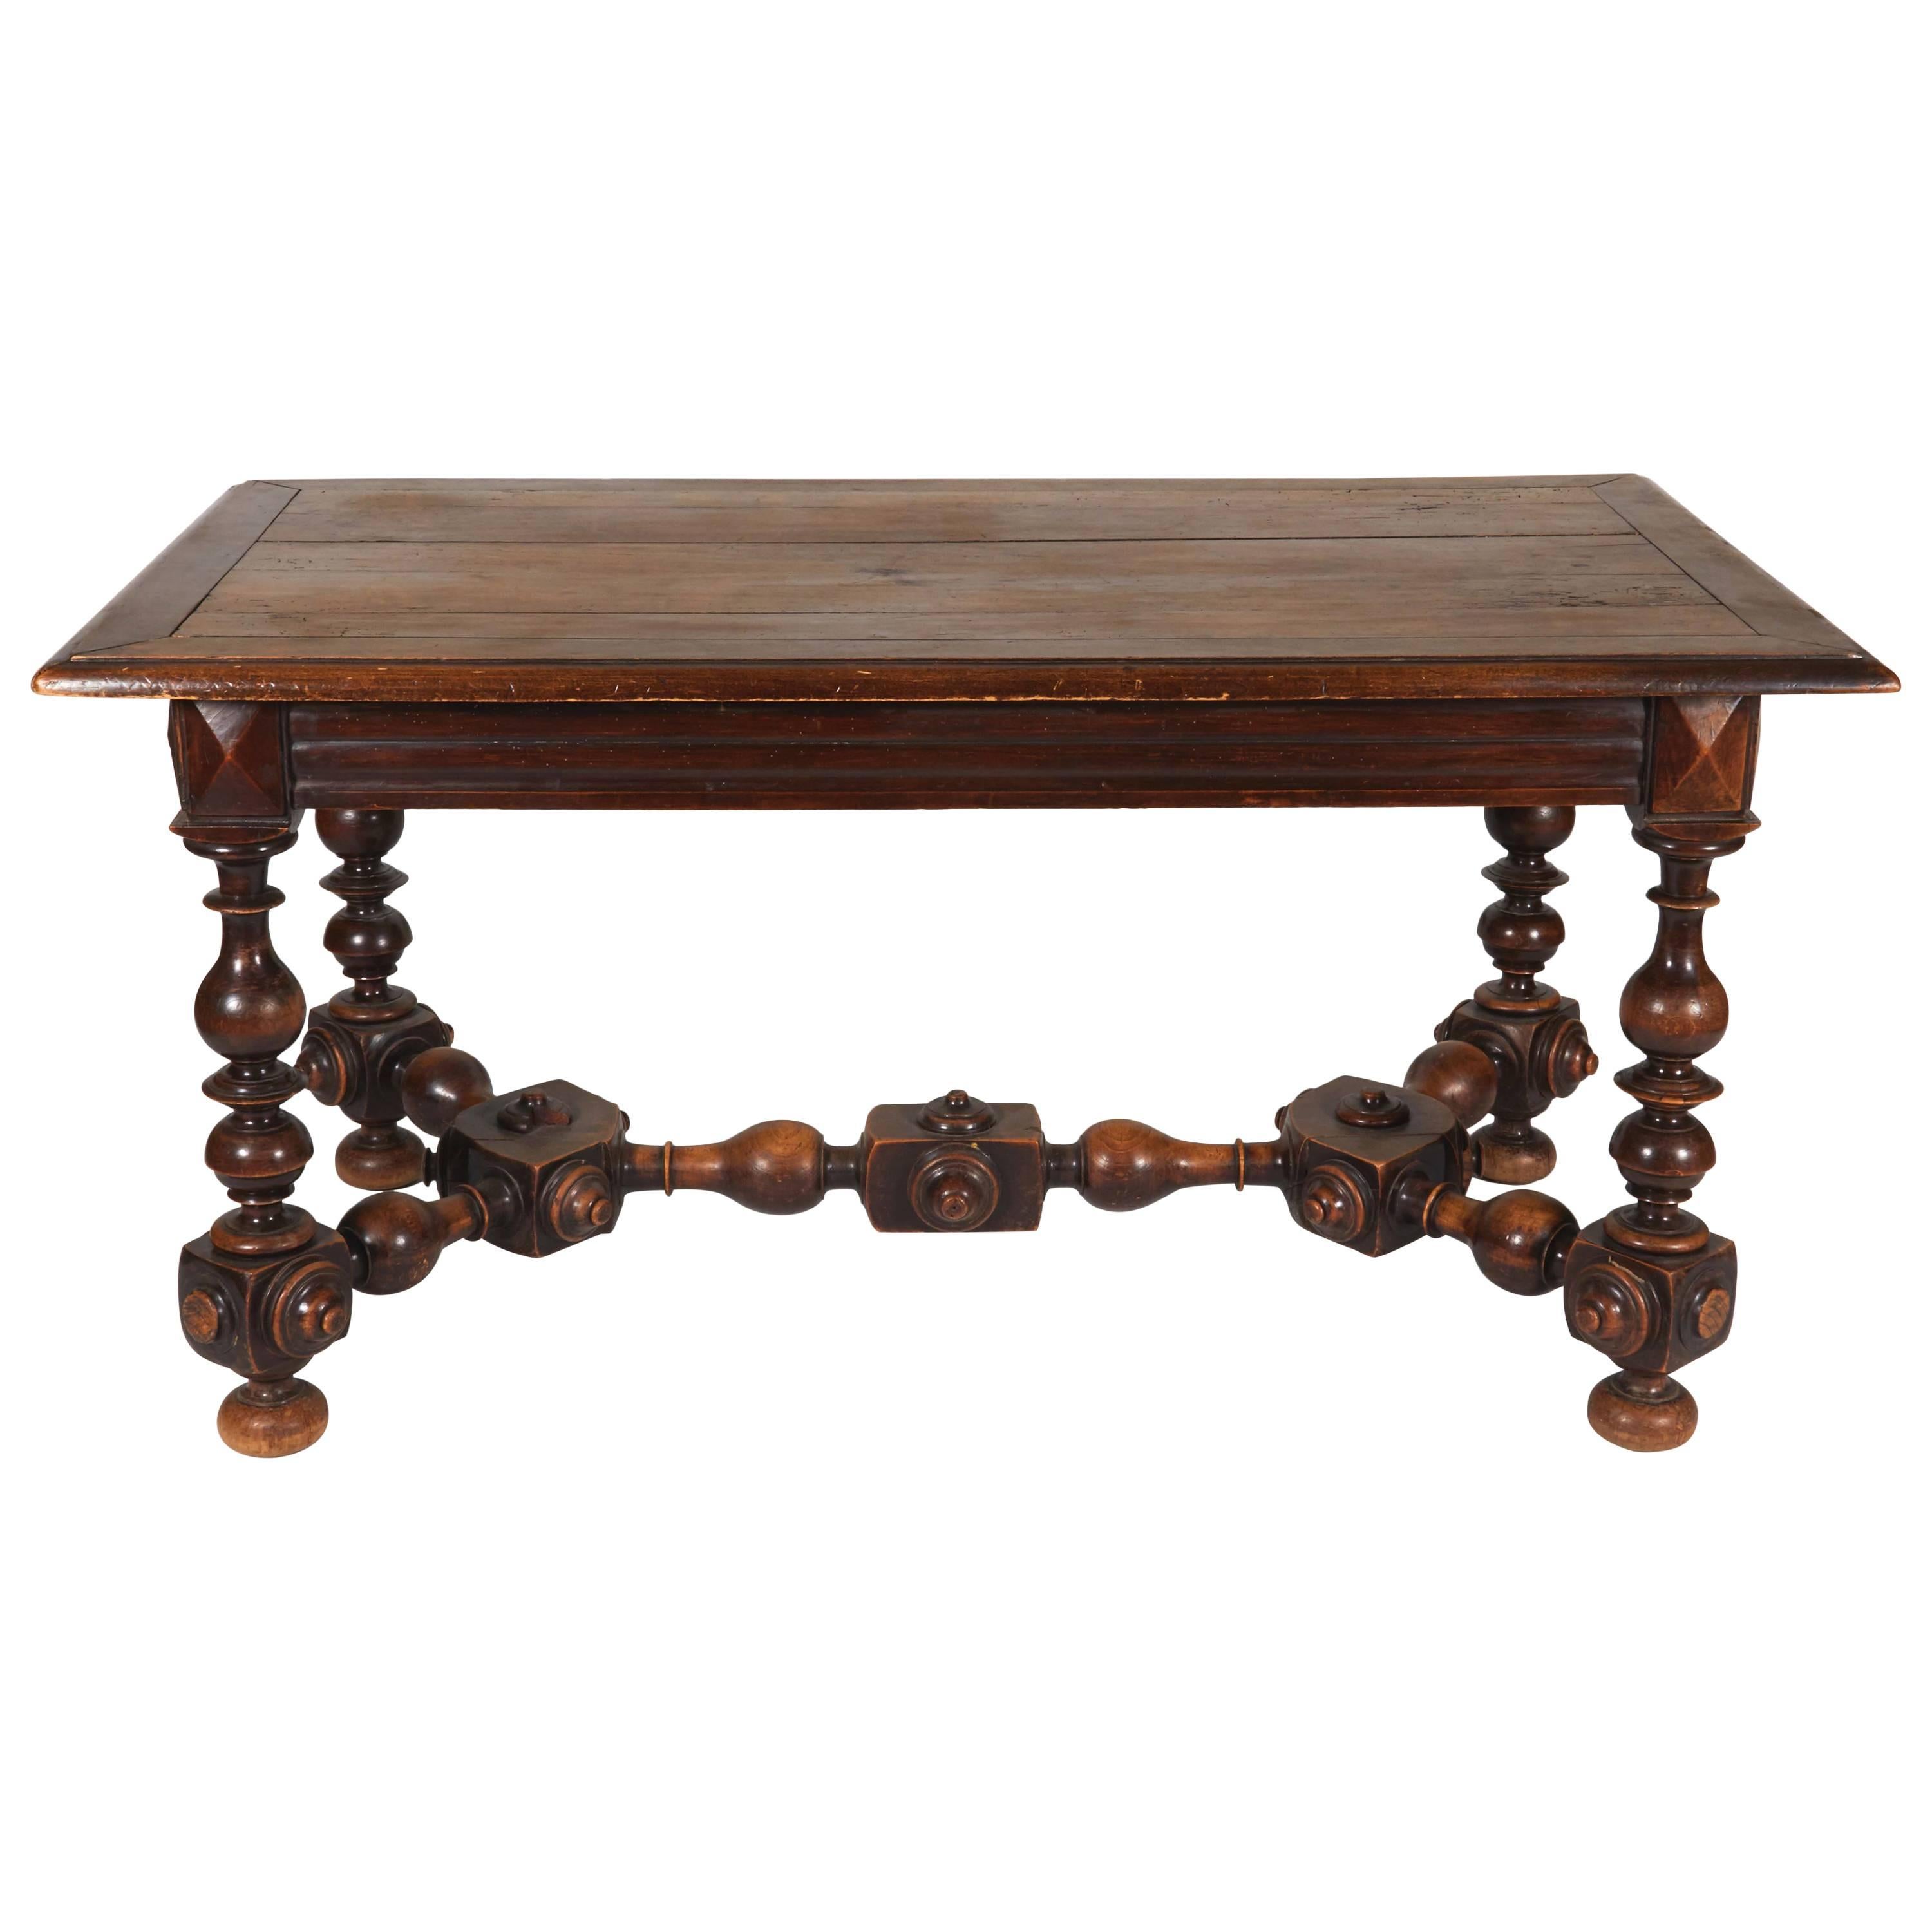 Wood Table with Ornate Legs